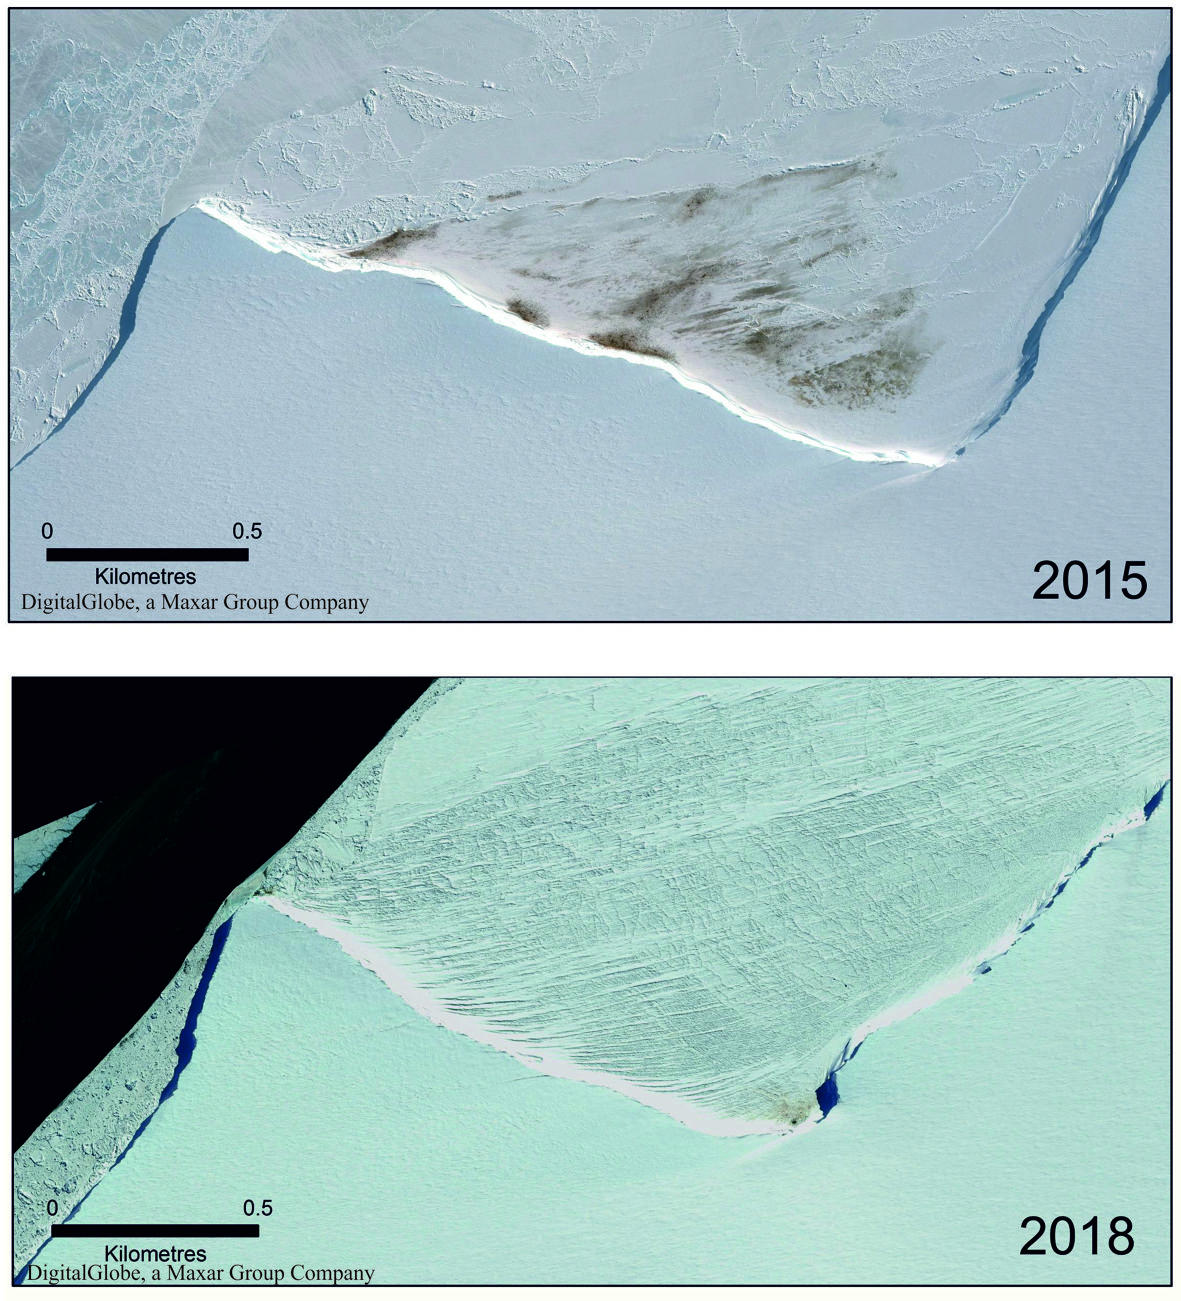 The Halley Bay emperor penguin colony declined dramatically from 2015 to 2018, as these satellite images show. As of 2019, the colony has disappeared.